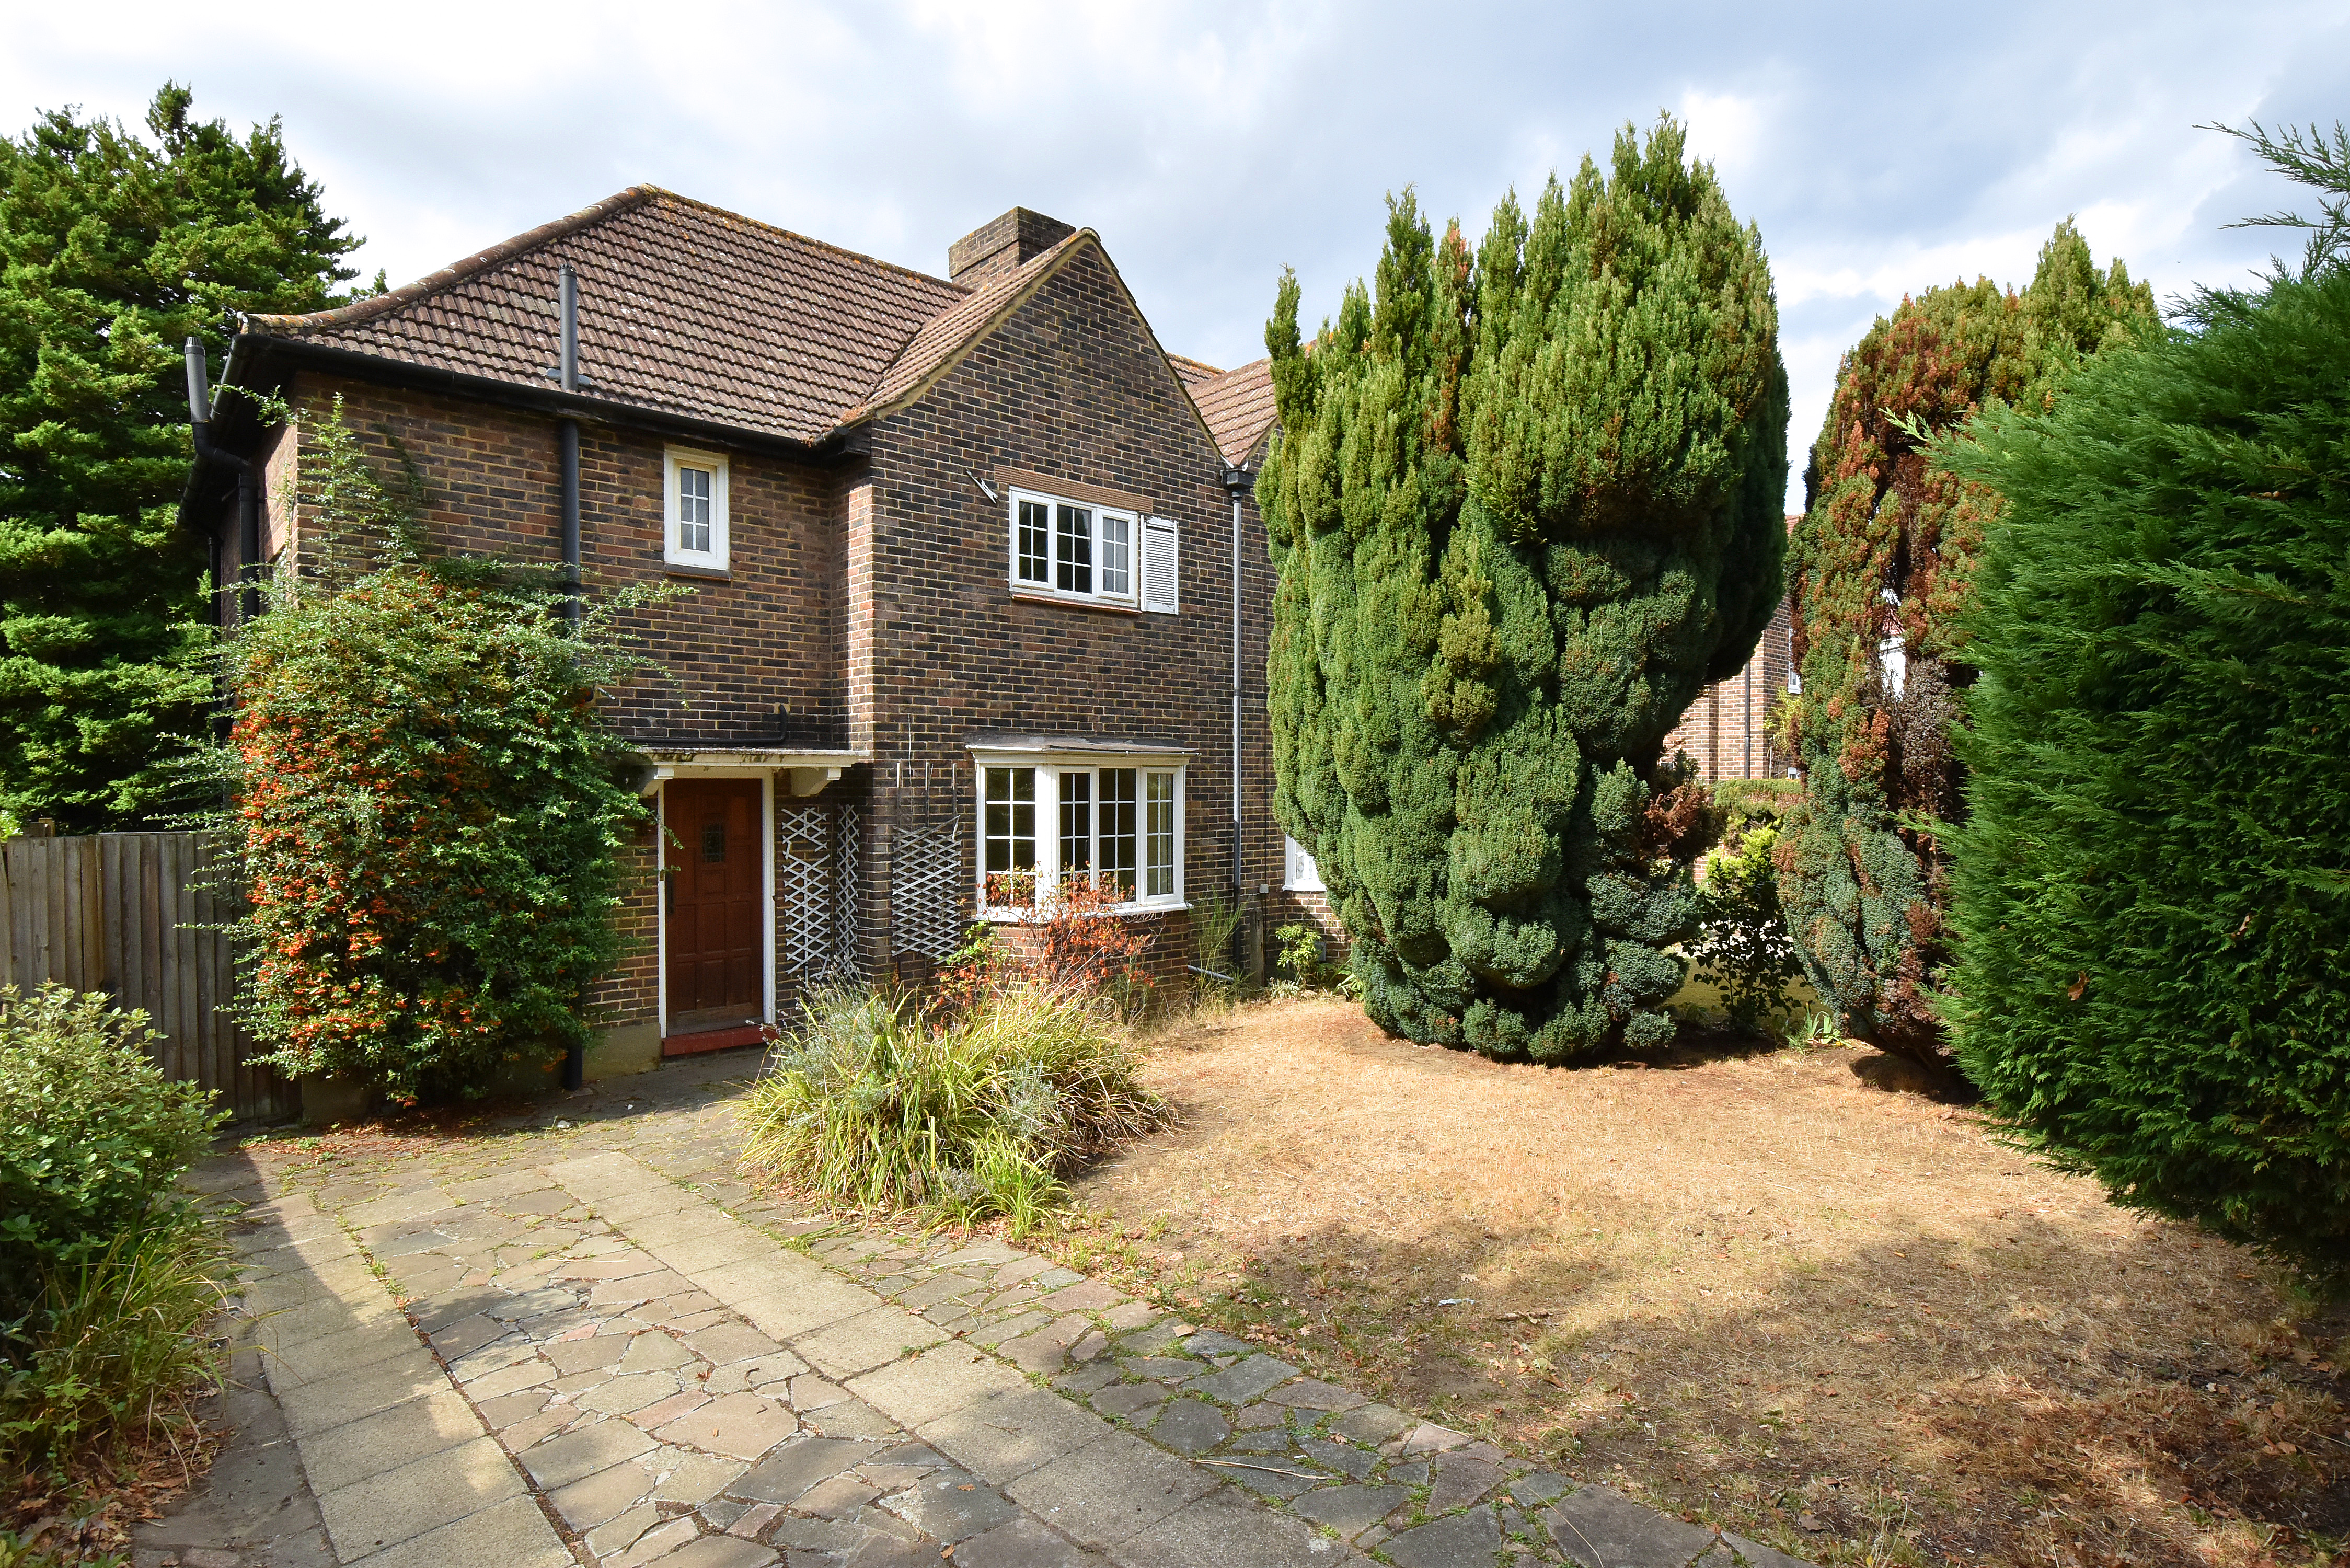 3 bed semi-detached house for sale in Farnaby Road, Bromley, BR1 